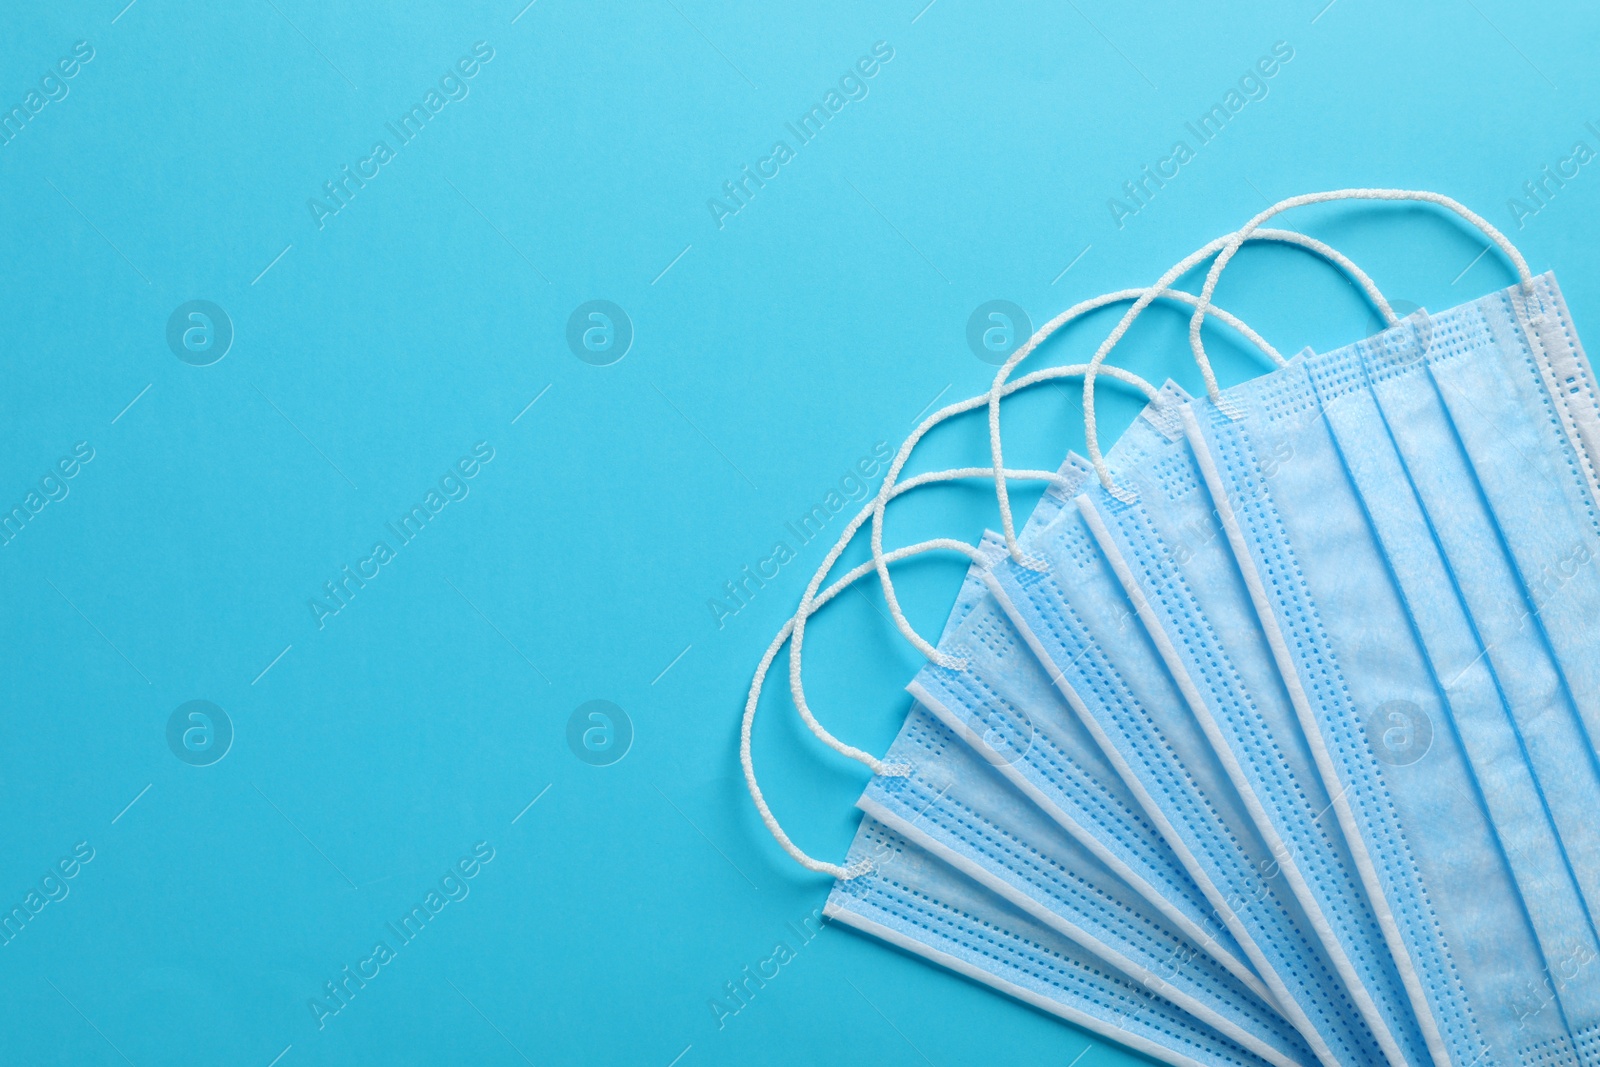 Photo of Protective mask on light blue background, flat lay with space for text. Safety equipment